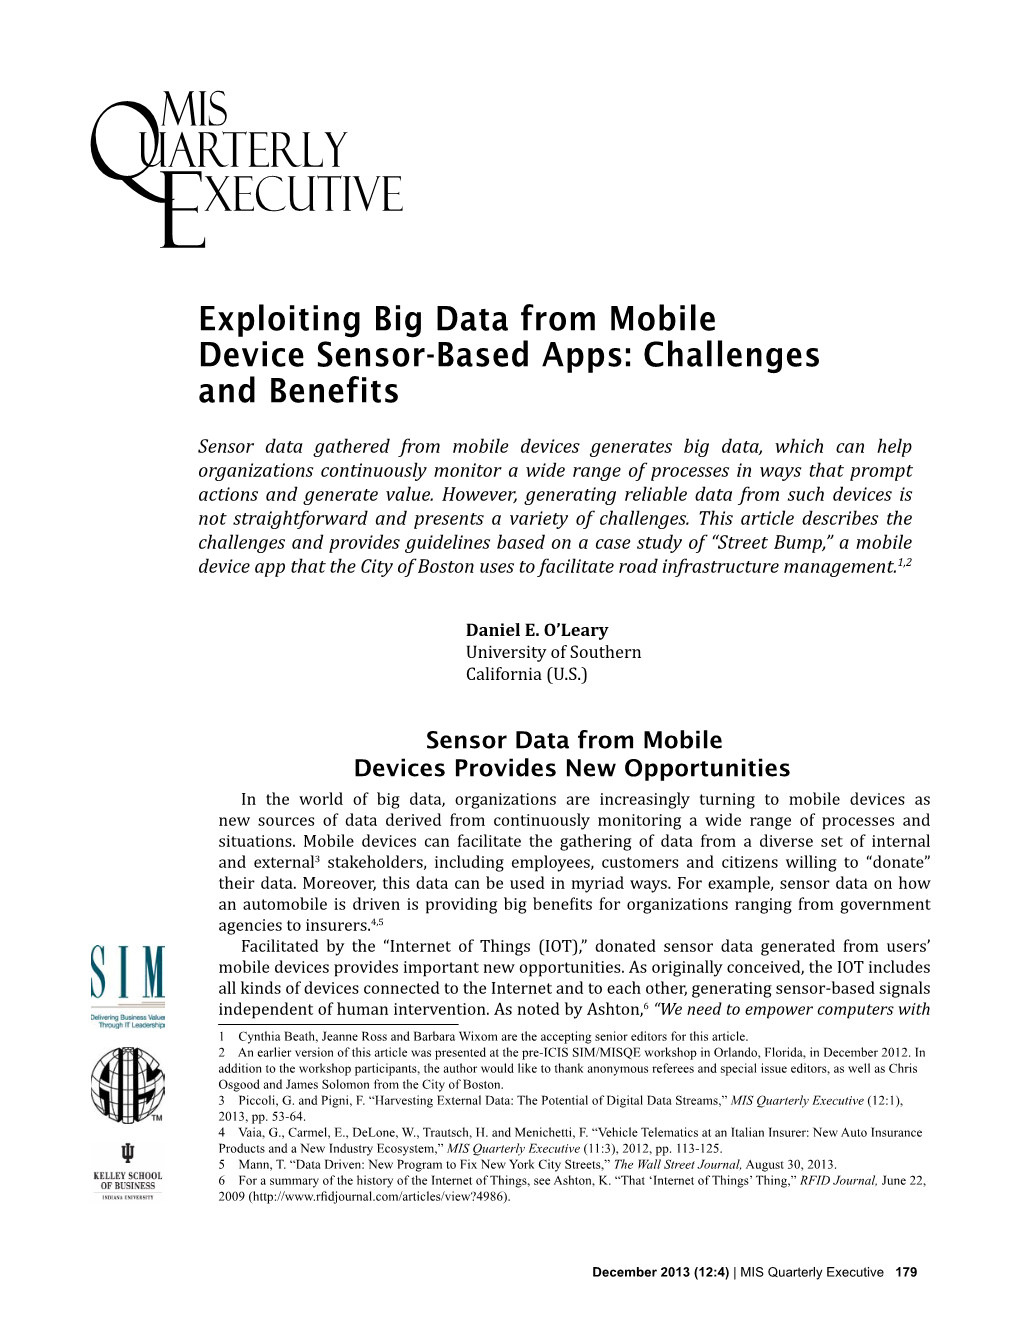 Exploiting Big Data from Mobile Device Sensor-Based Apps: Challenges and Benefits